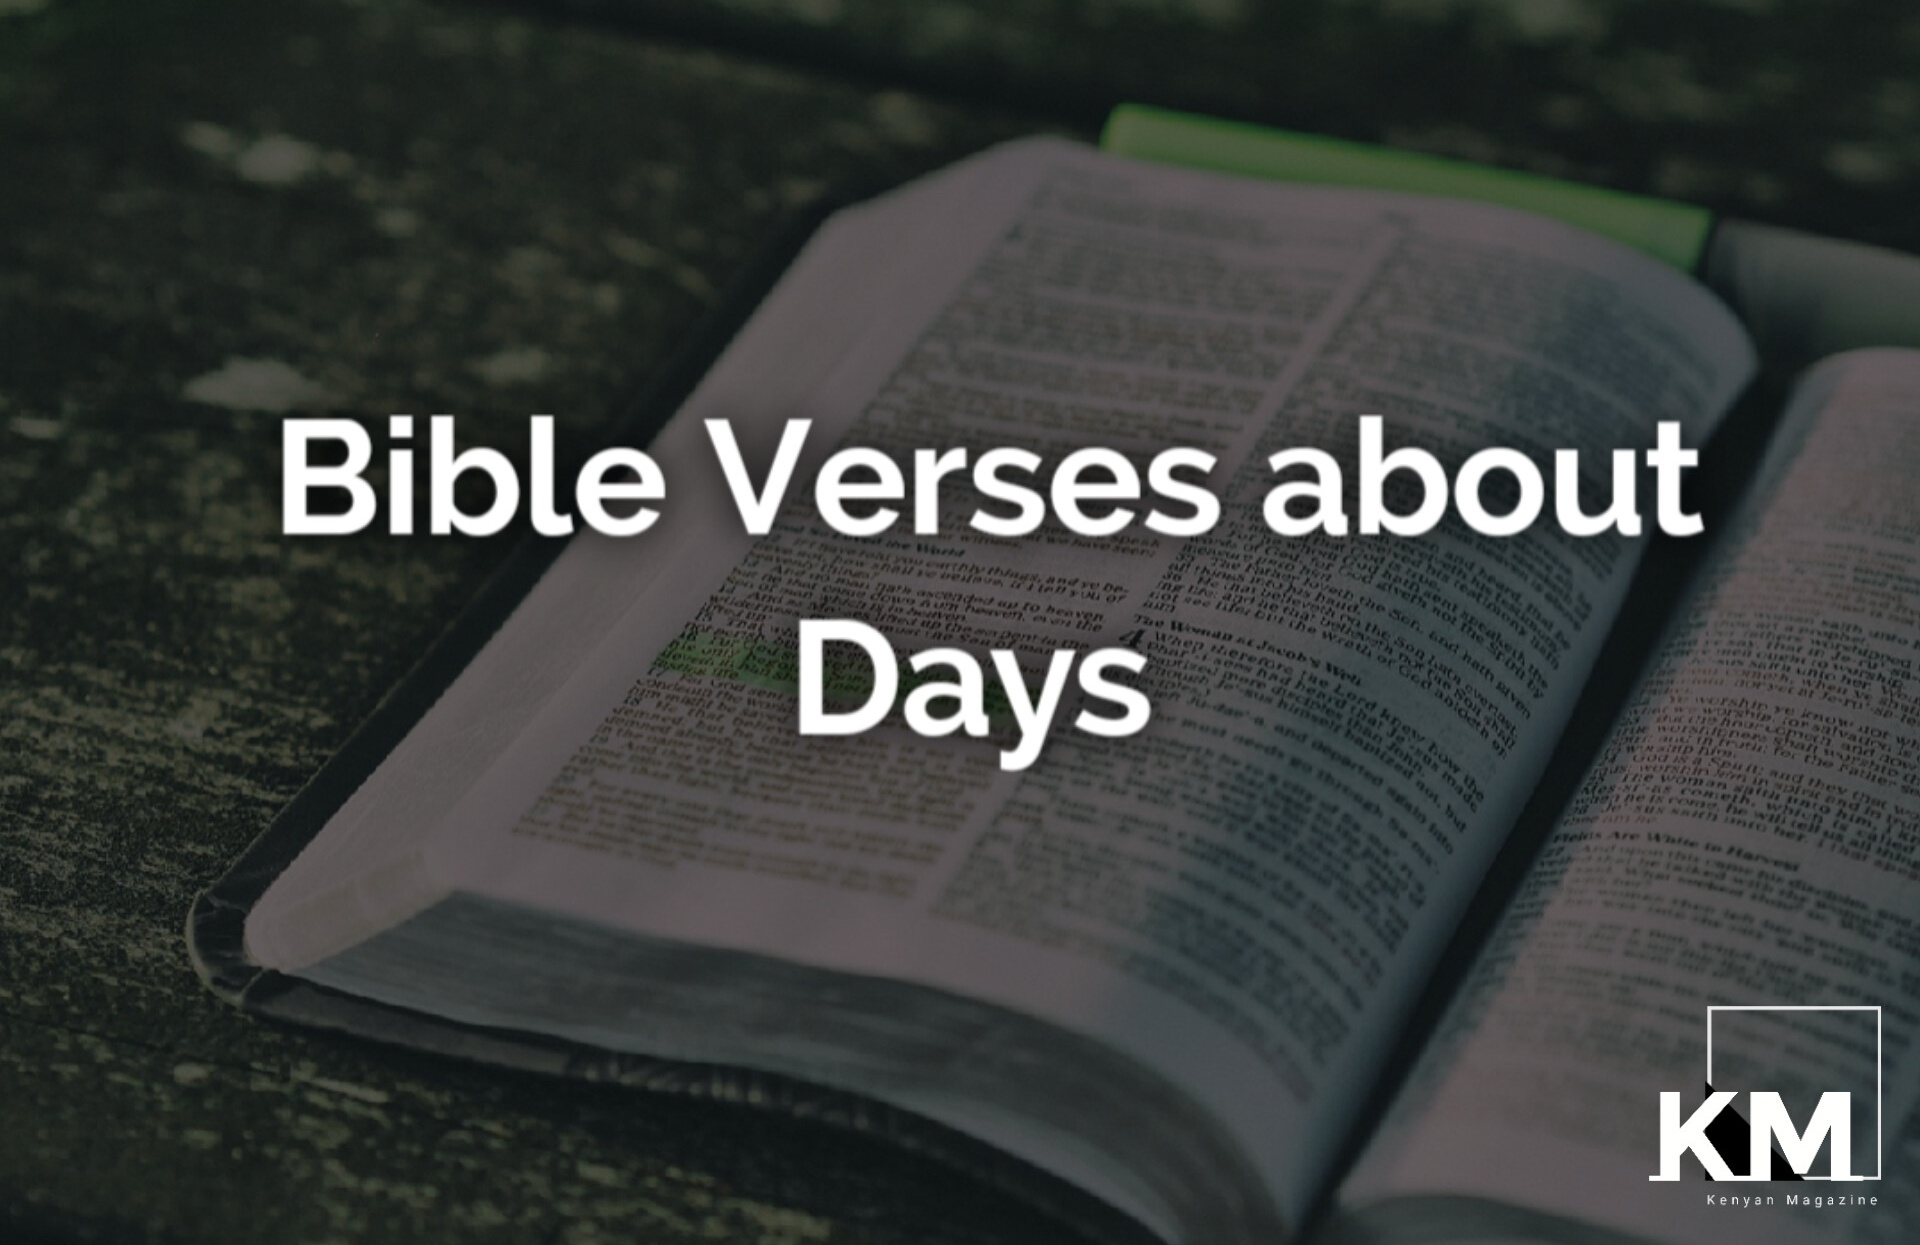 Bible verses about days